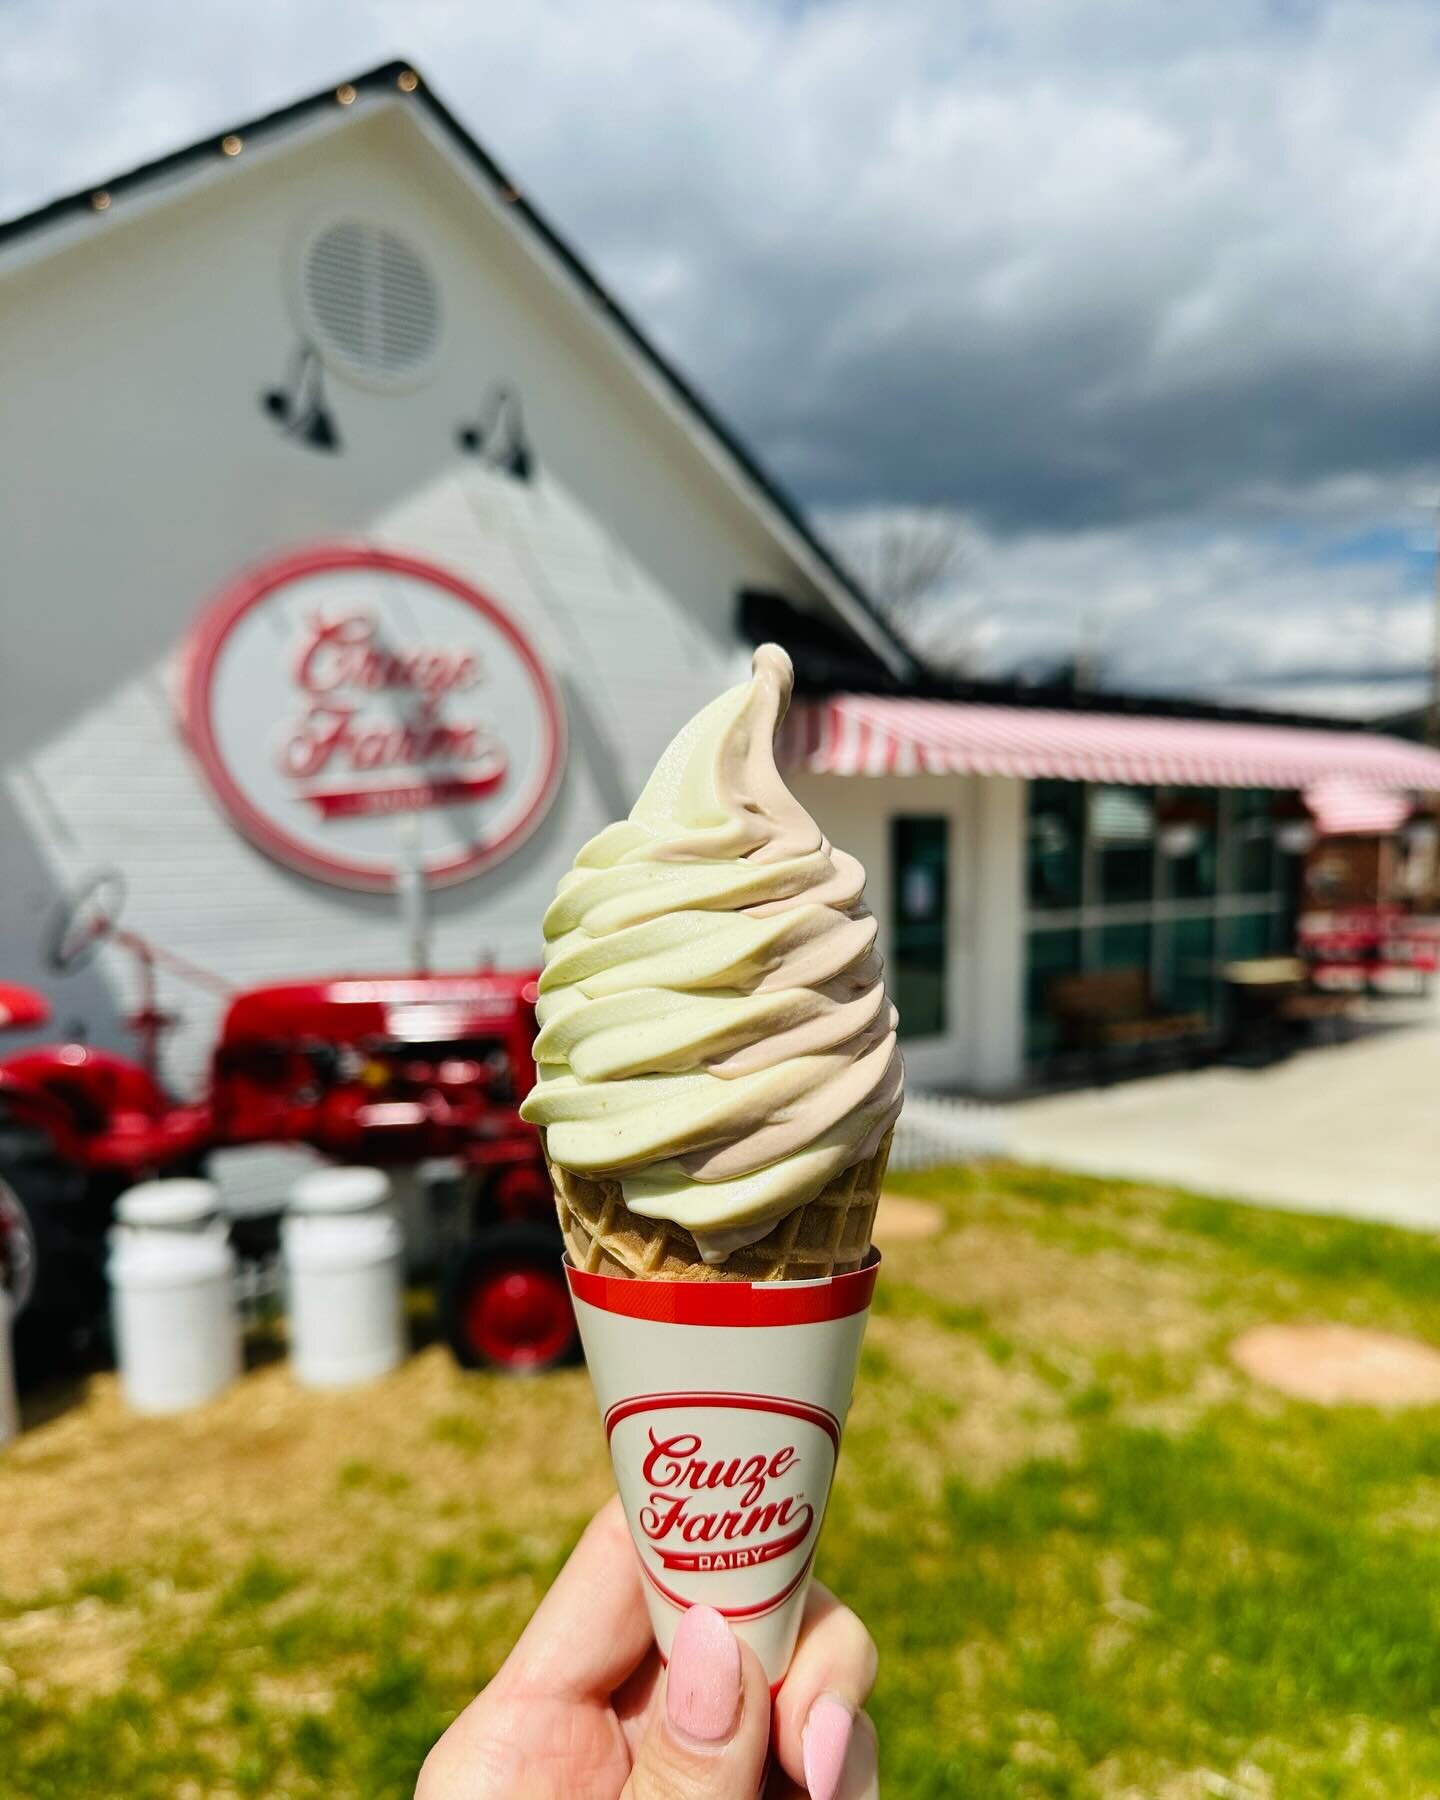 It's a beautiful day in Morristown! ☀️ 

Today's Flavors! 
🍦 Sweet Cream
🍫 Chocolate 
🍓 Strawberry 
💚 Pistachio
🤎 Nutella
🧈  Brown Butter 
💗 Raspberry Dole Whip 
🍋 Lemon Dole Whip

Open everyday 12-9 pm!

📍143 E. Main Street Morristown